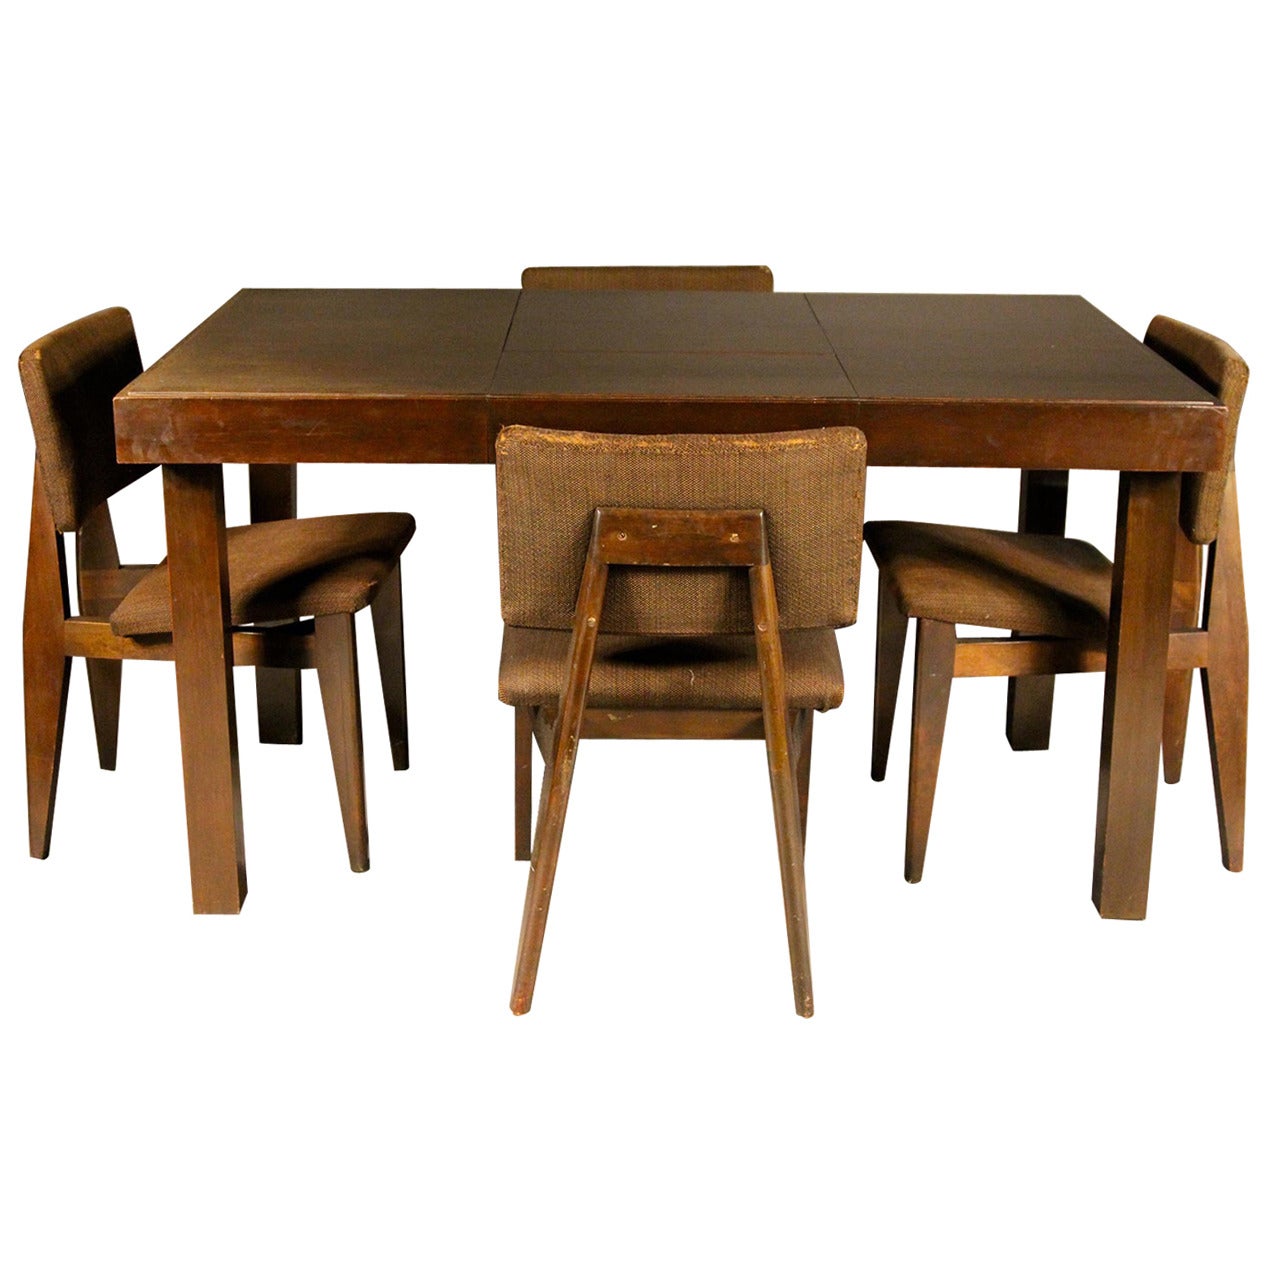 George Nelson for Herman Miller Prima Vera Table with George Nelson Chairs For Sale